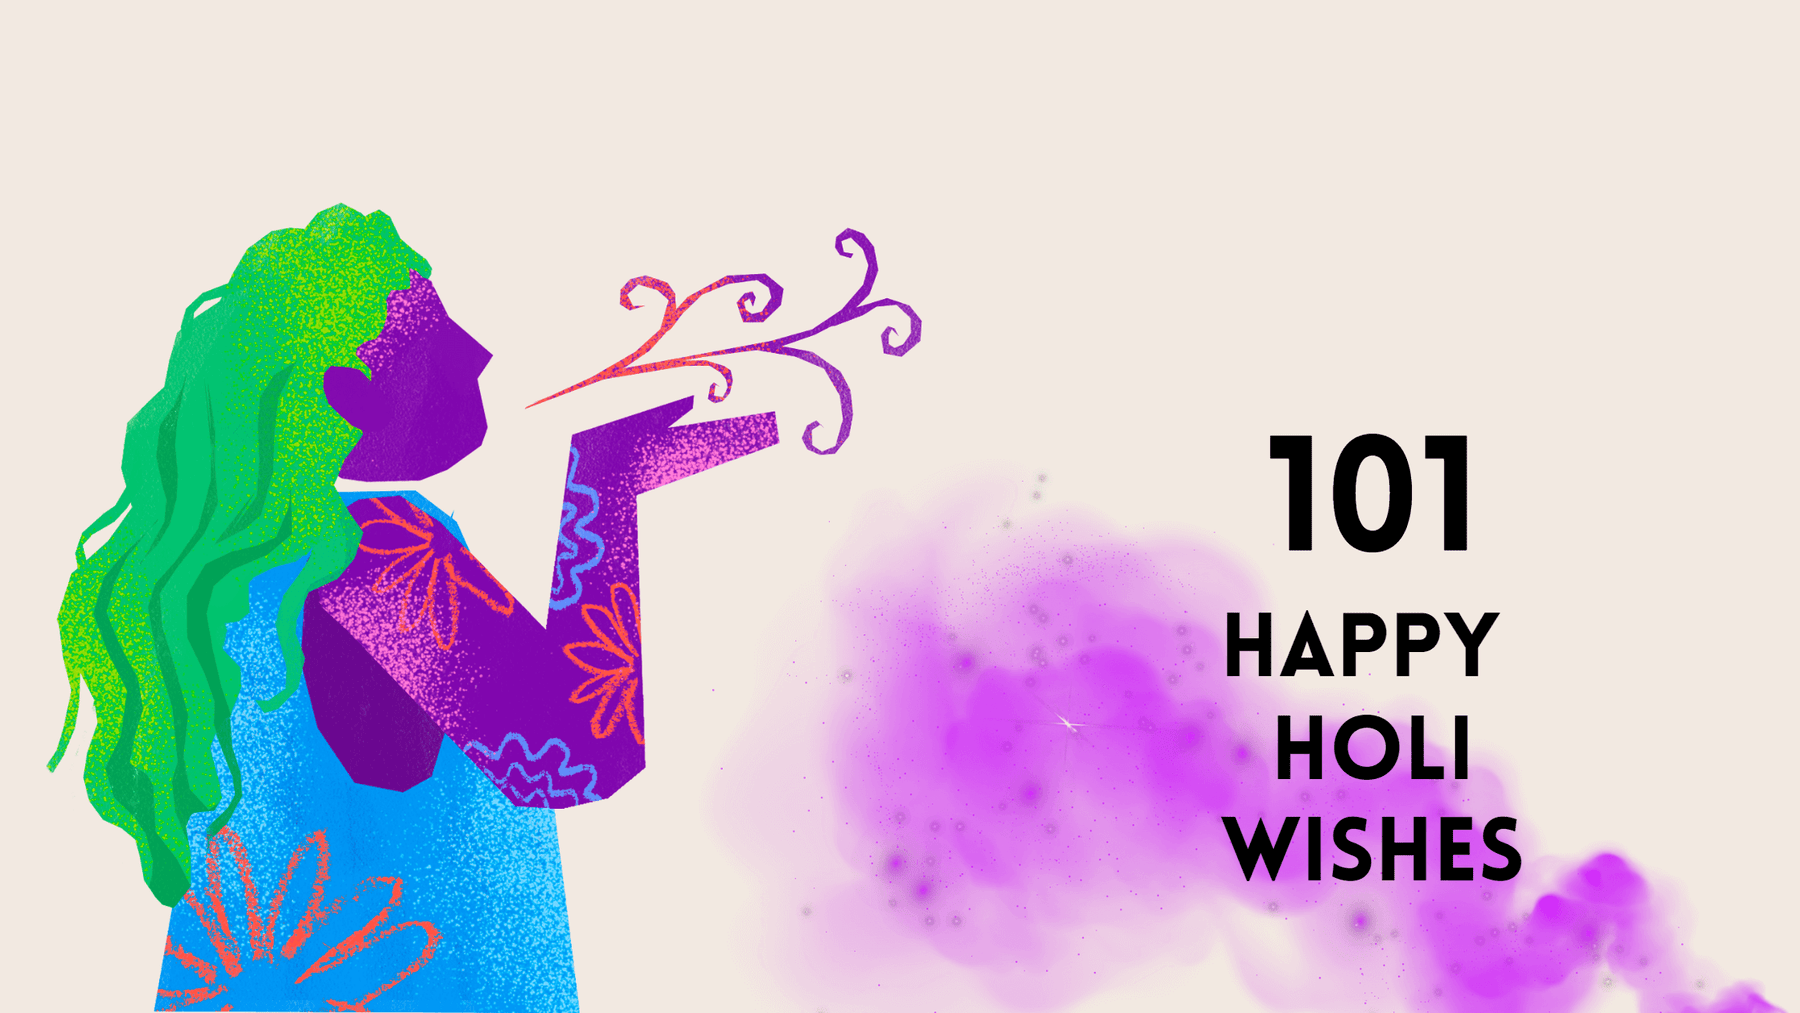 101 Happy Holi Wishes: Celebrating the Festival of Colors with Joy and Love